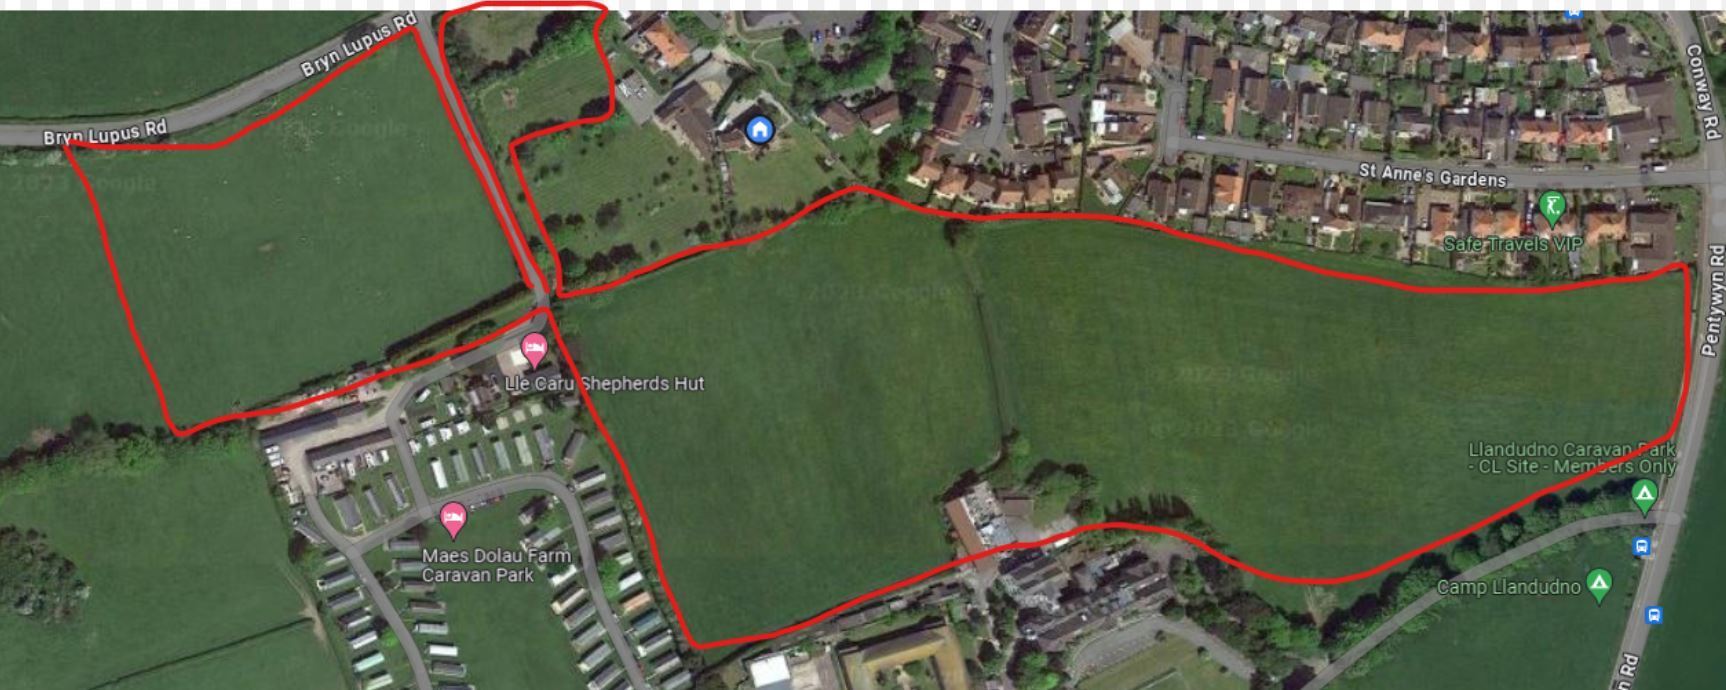 The Llanrhos Local Residents’ Group have now written to councillors in opposition to the plans for land off Pentywyn Road and Bryn Lupus Road in Llanrhos..